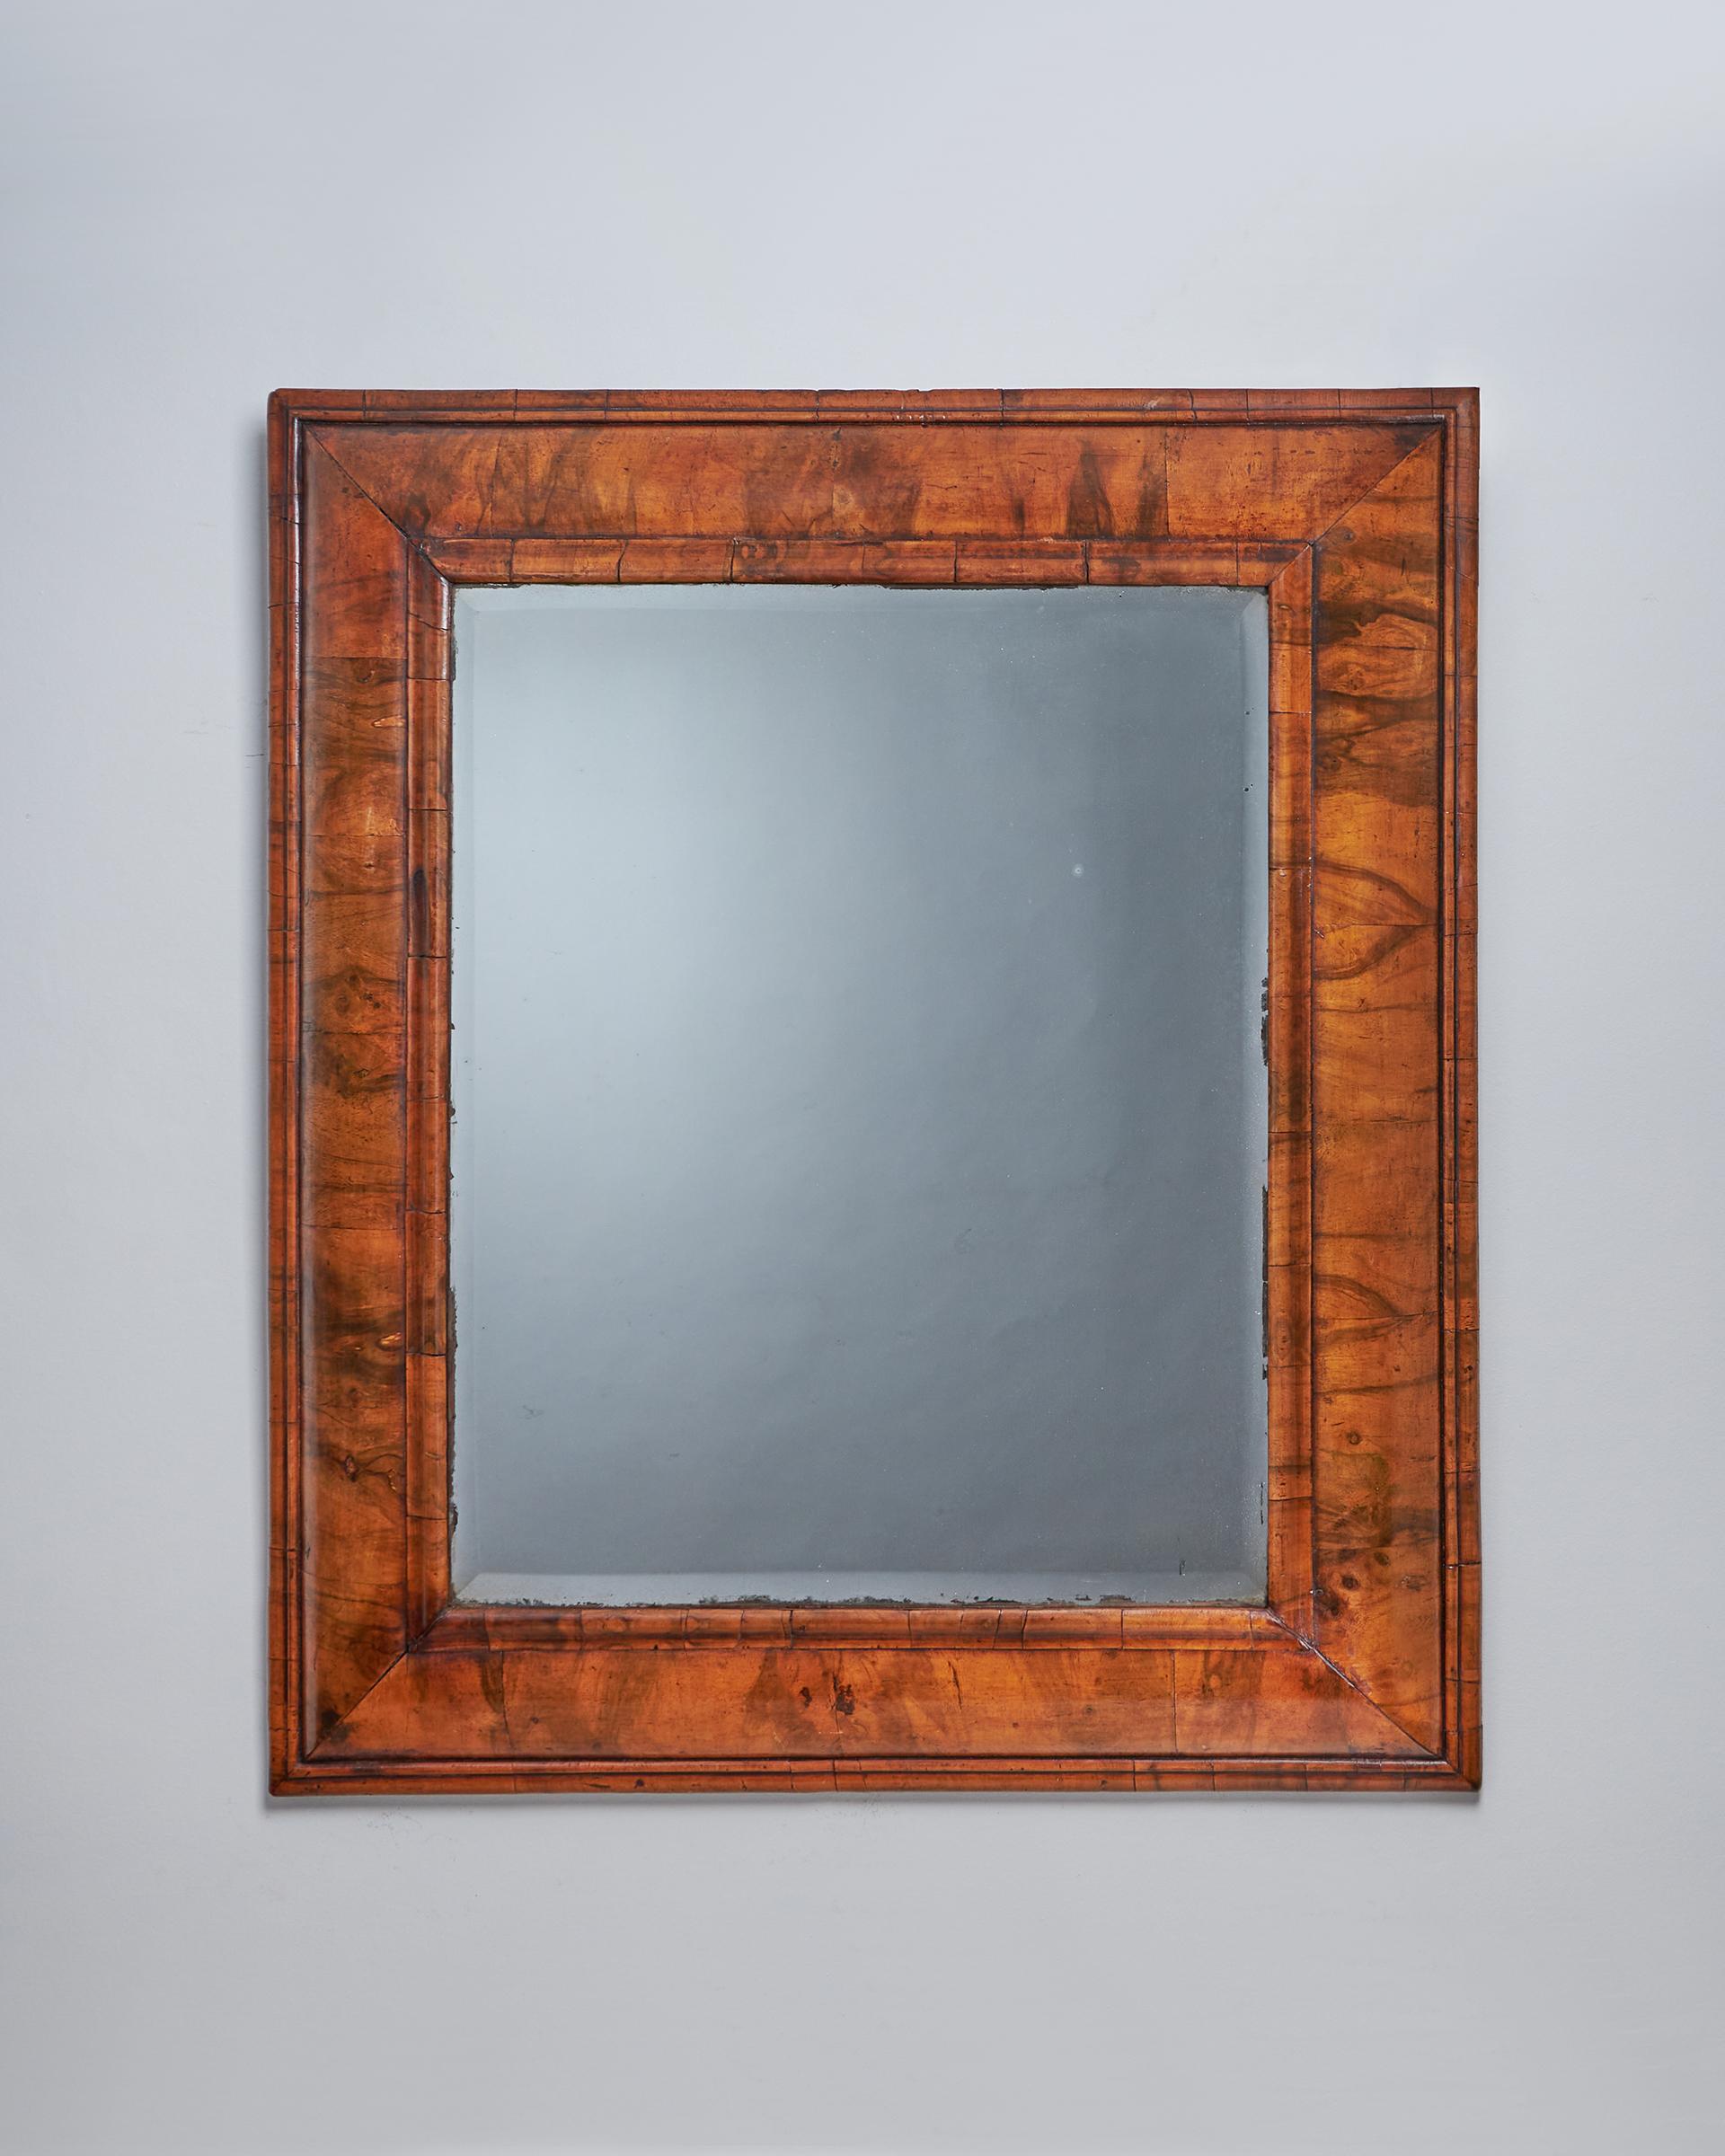 An extremely large and rare William and Mary 17th century figured walnut cushion mirror, circa 1670-1690.

The original soft bevelled edge mirror plate is bordered by fine cross-grain ovolo mouldings. The pulvinated frame is decorated entirely in